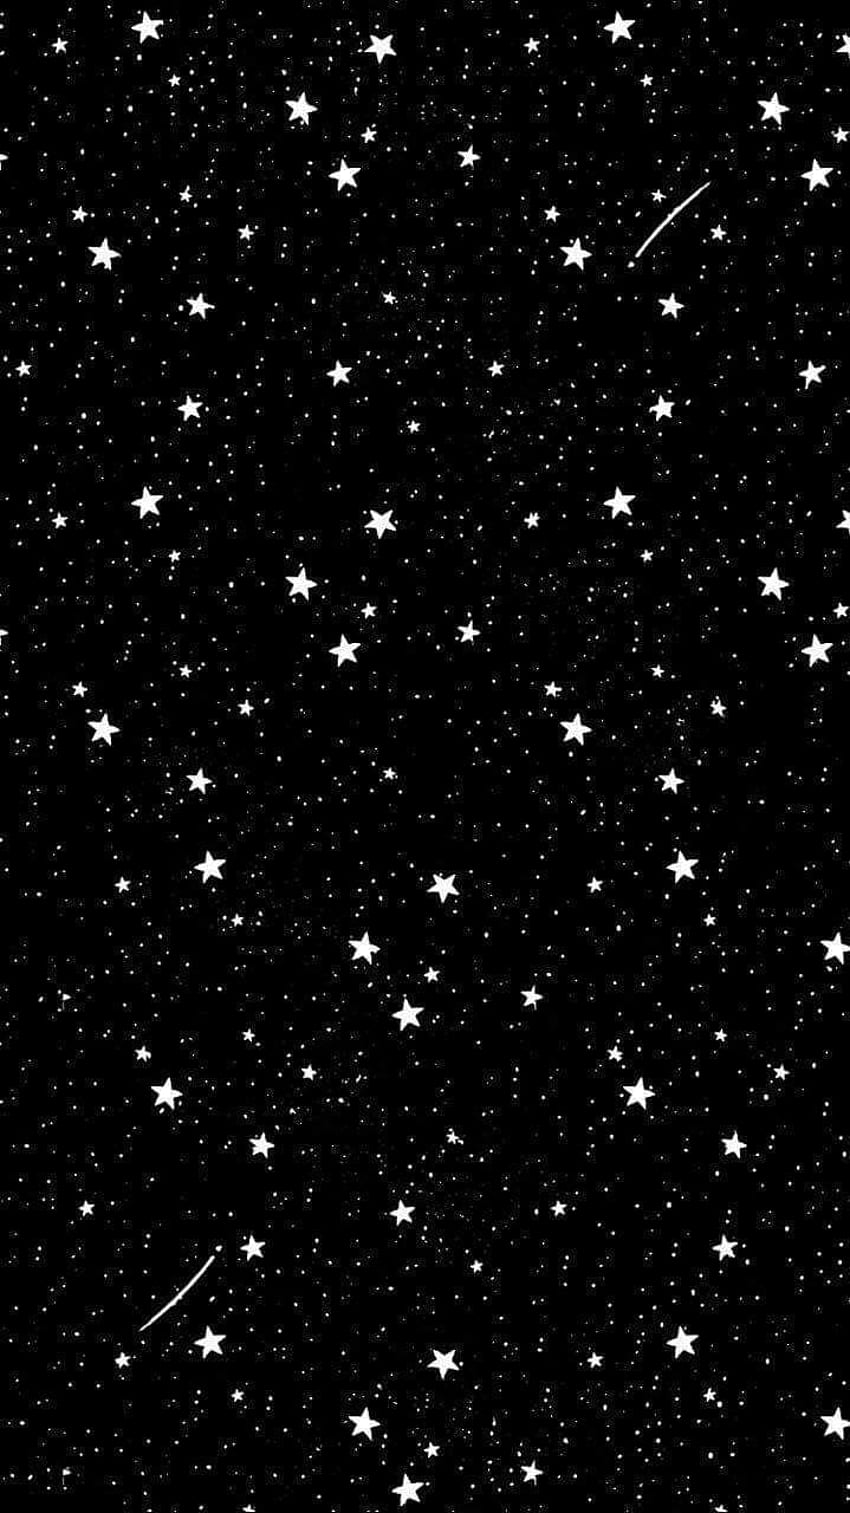 Aesthetic black and white wallpaper with stars and shooting stars. - Stars, dark, constellation